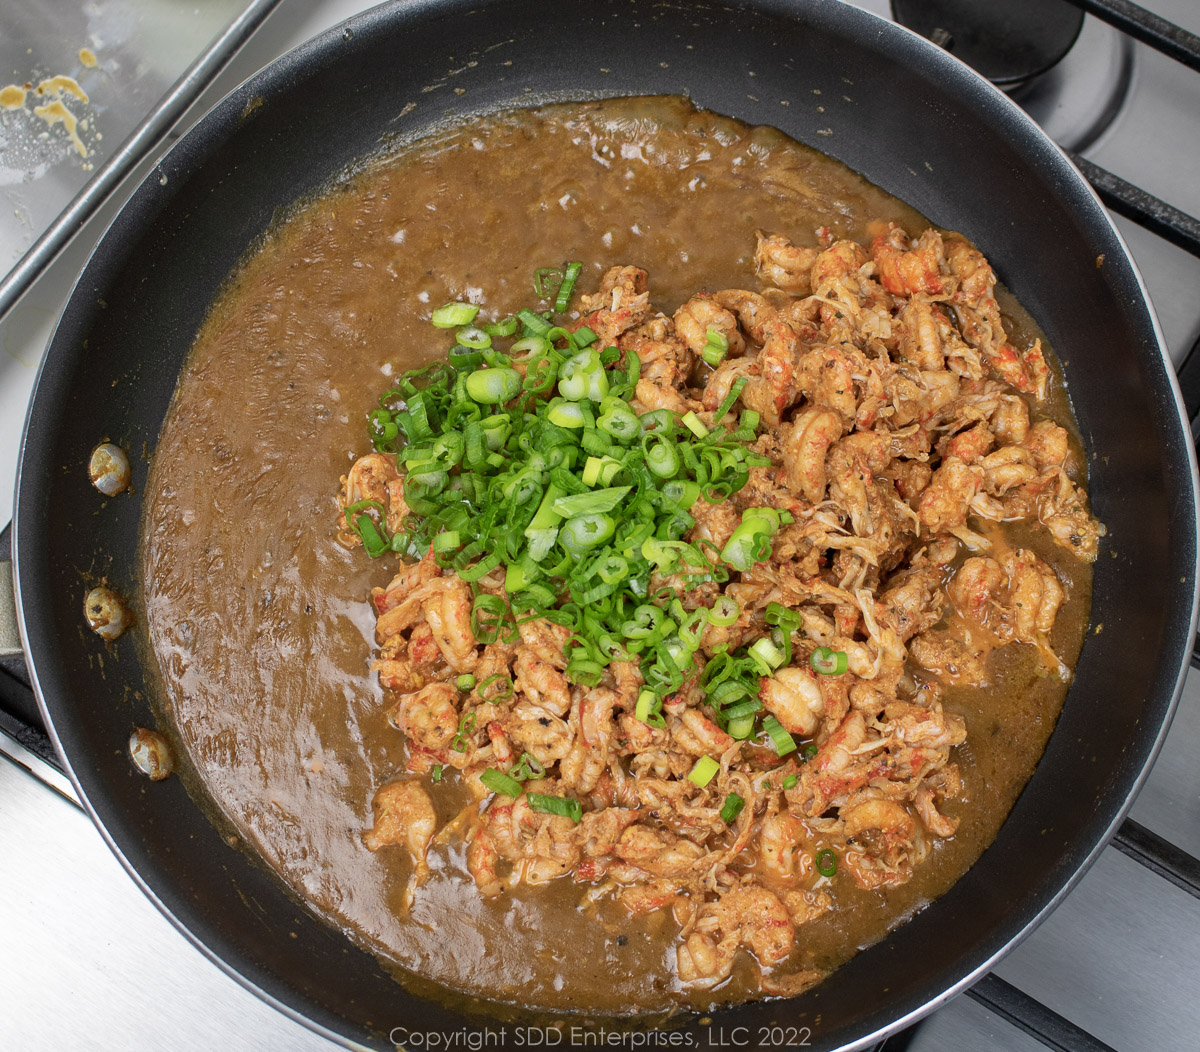 crawfish tails and green onions are added to brown sauce in a sauté pan